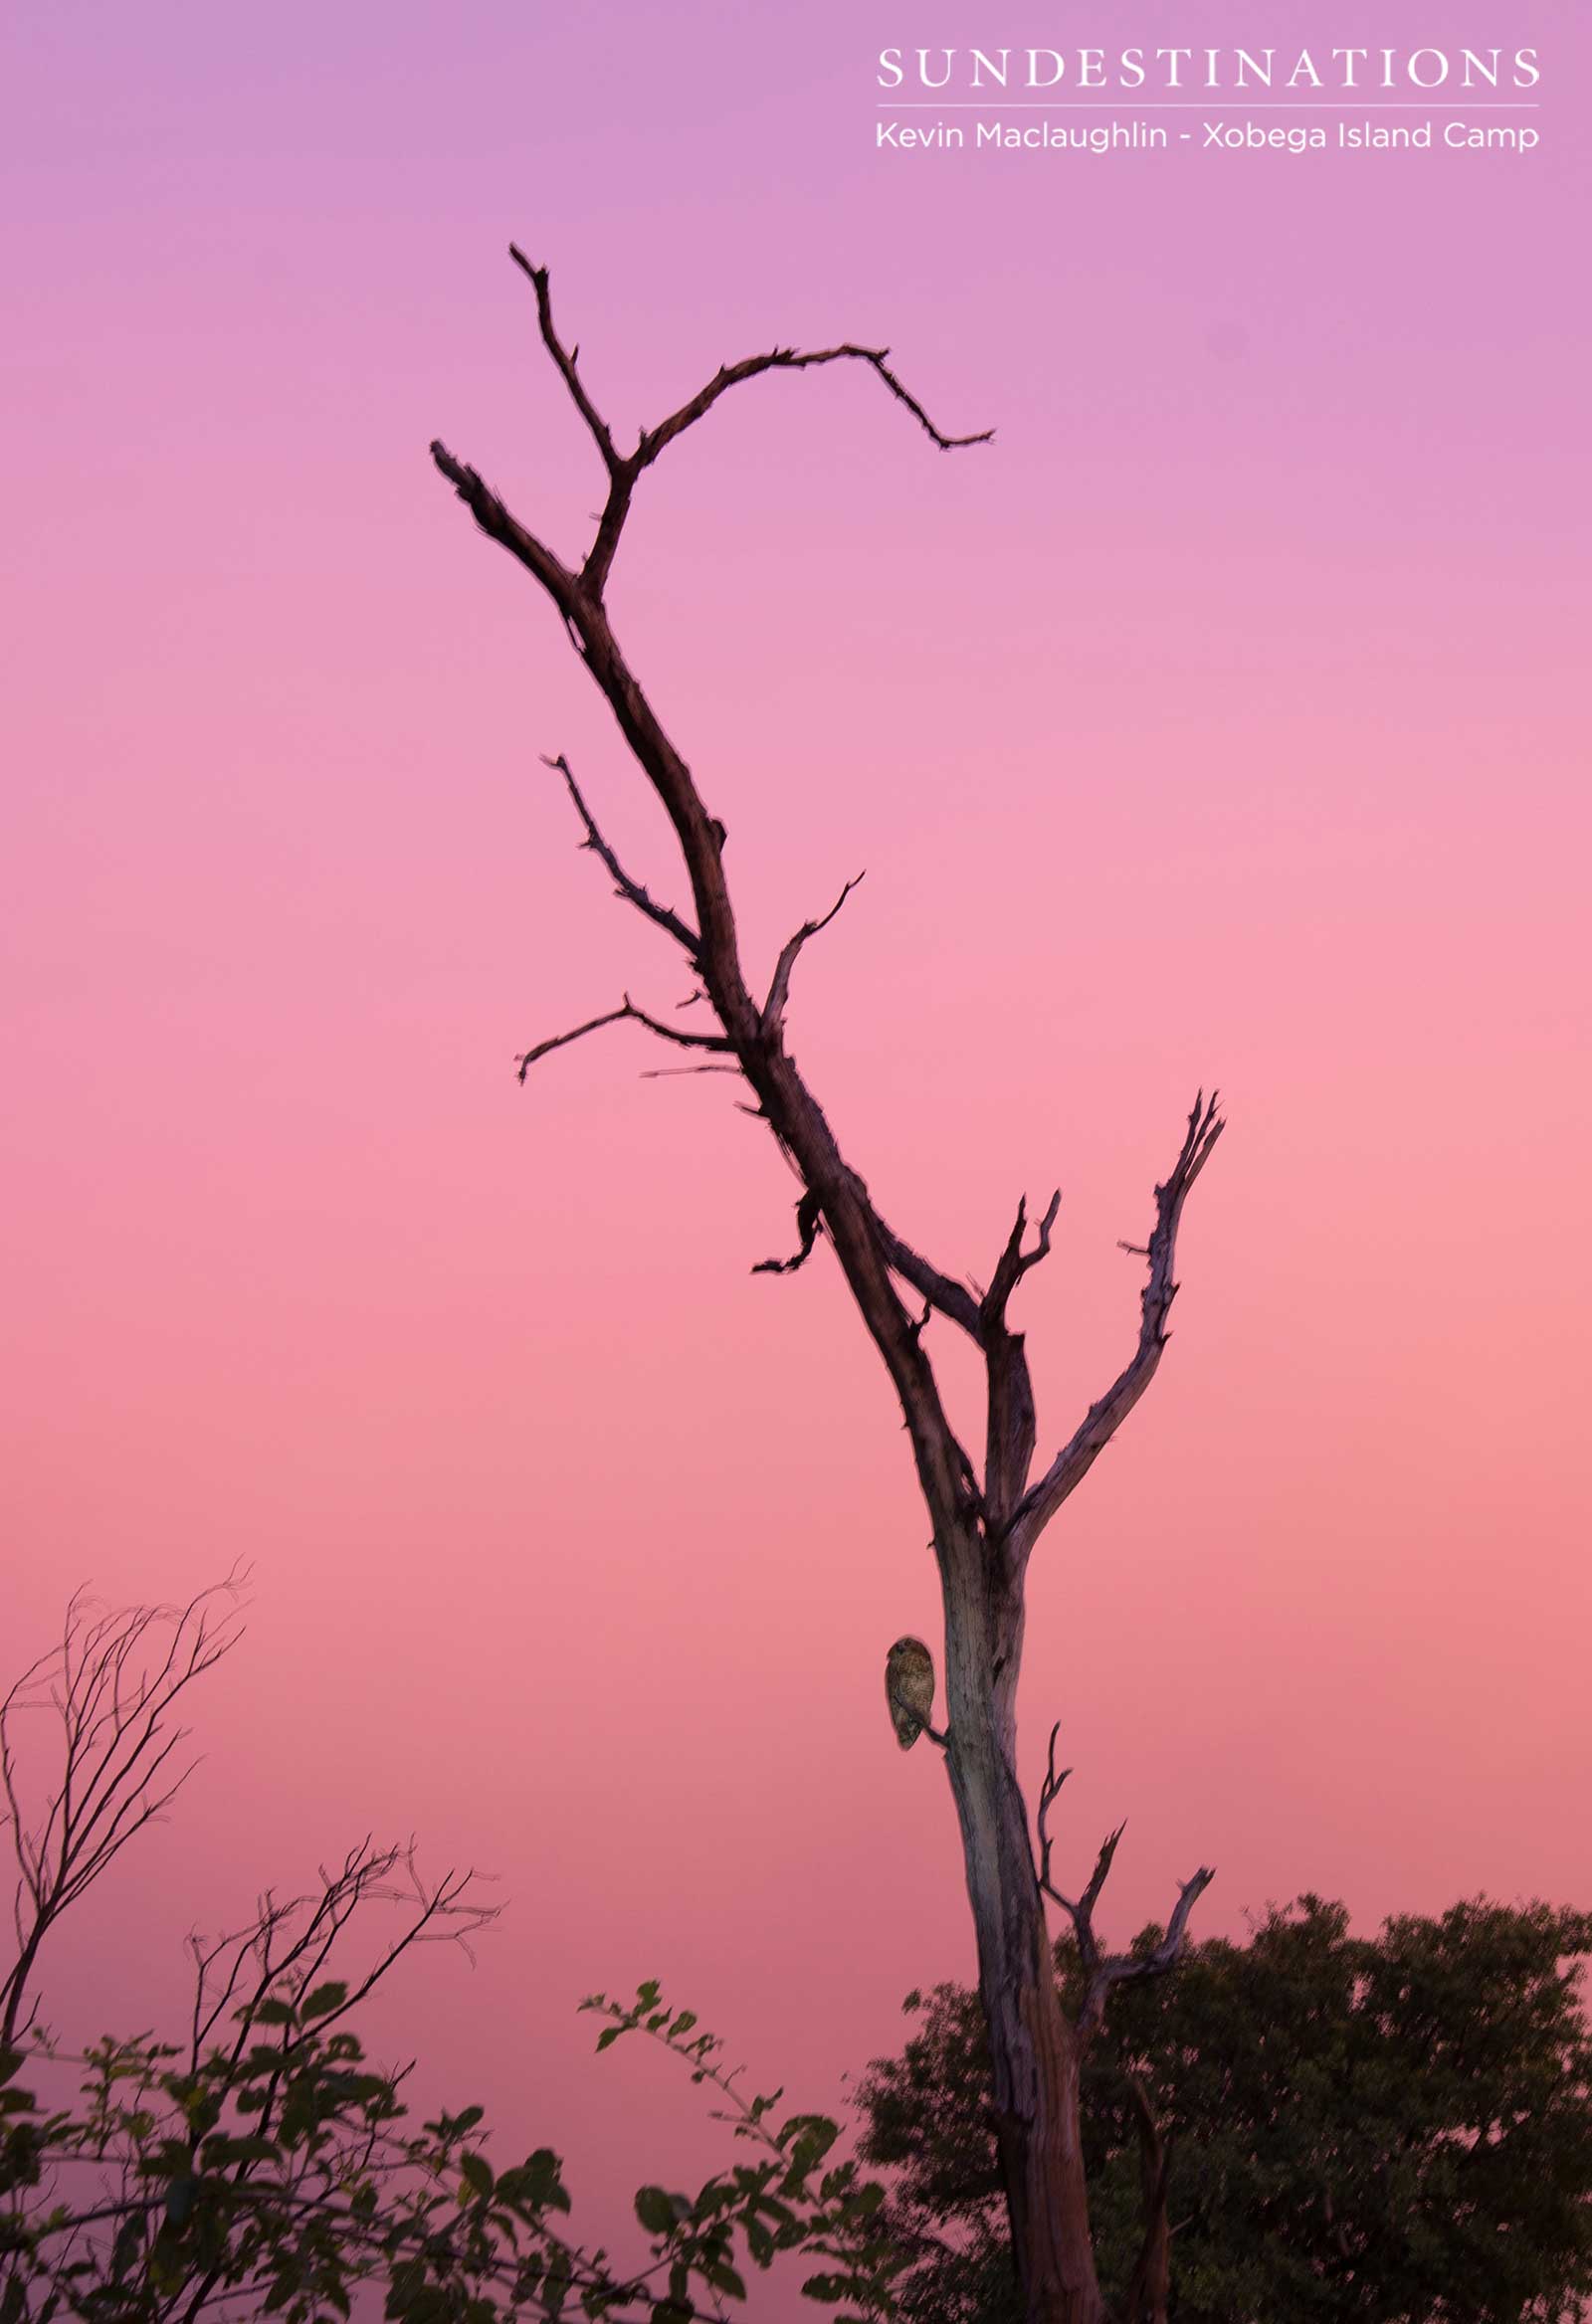 A Pel's fishing owl dwarfed by the ancient skeleton of a tree on Xobega Island. A fantastic pink sunset makes for the perfect backdrop to this exceptionally rare sighting.